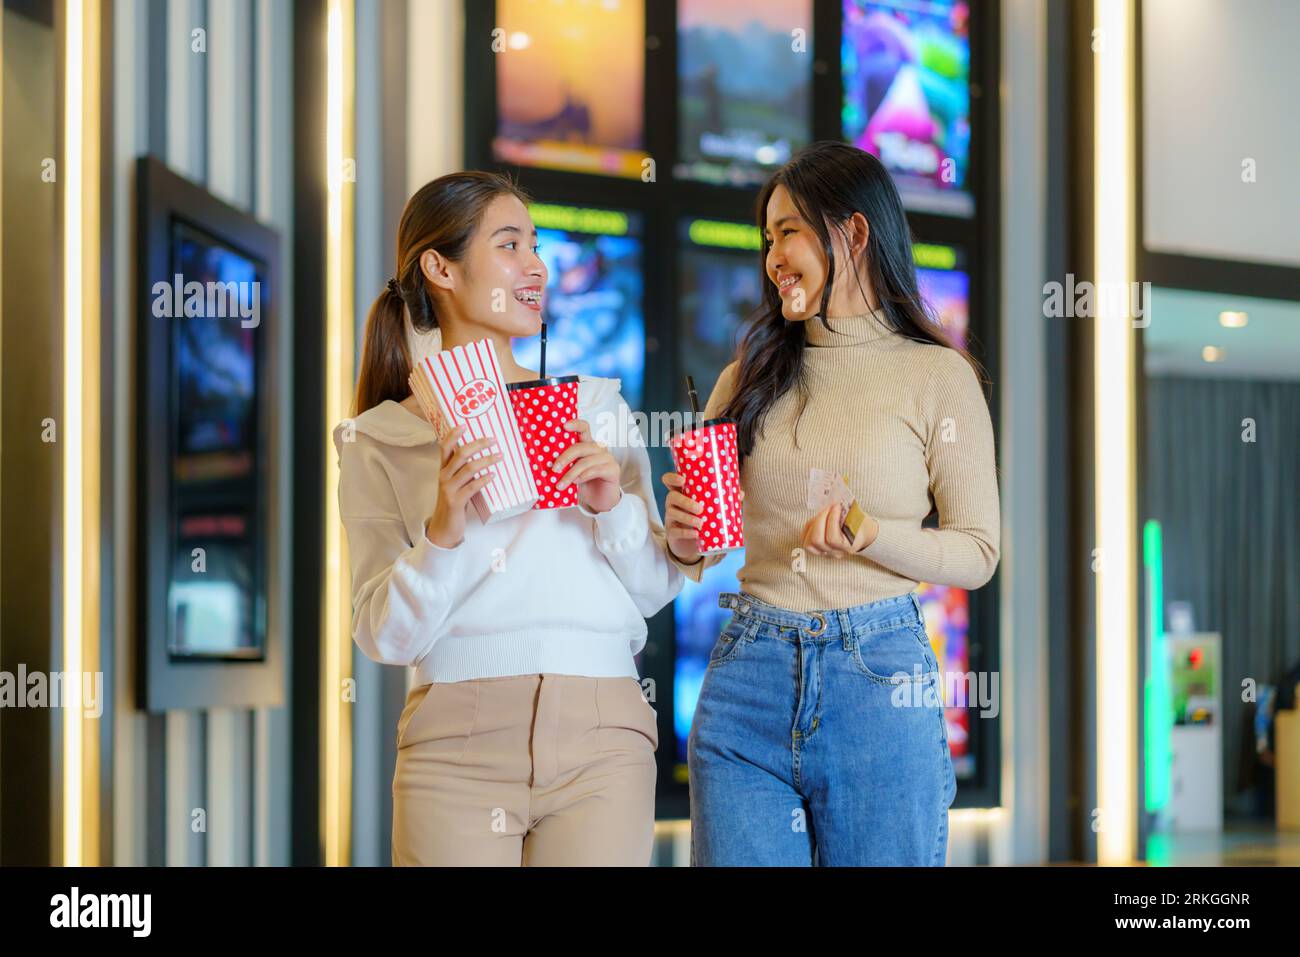 Asian friends, popcorn in hand, stroll joyfully in front of the cinema, embodying friendship and fun-filled anticipation for an entertaining movie nig Stock Photo